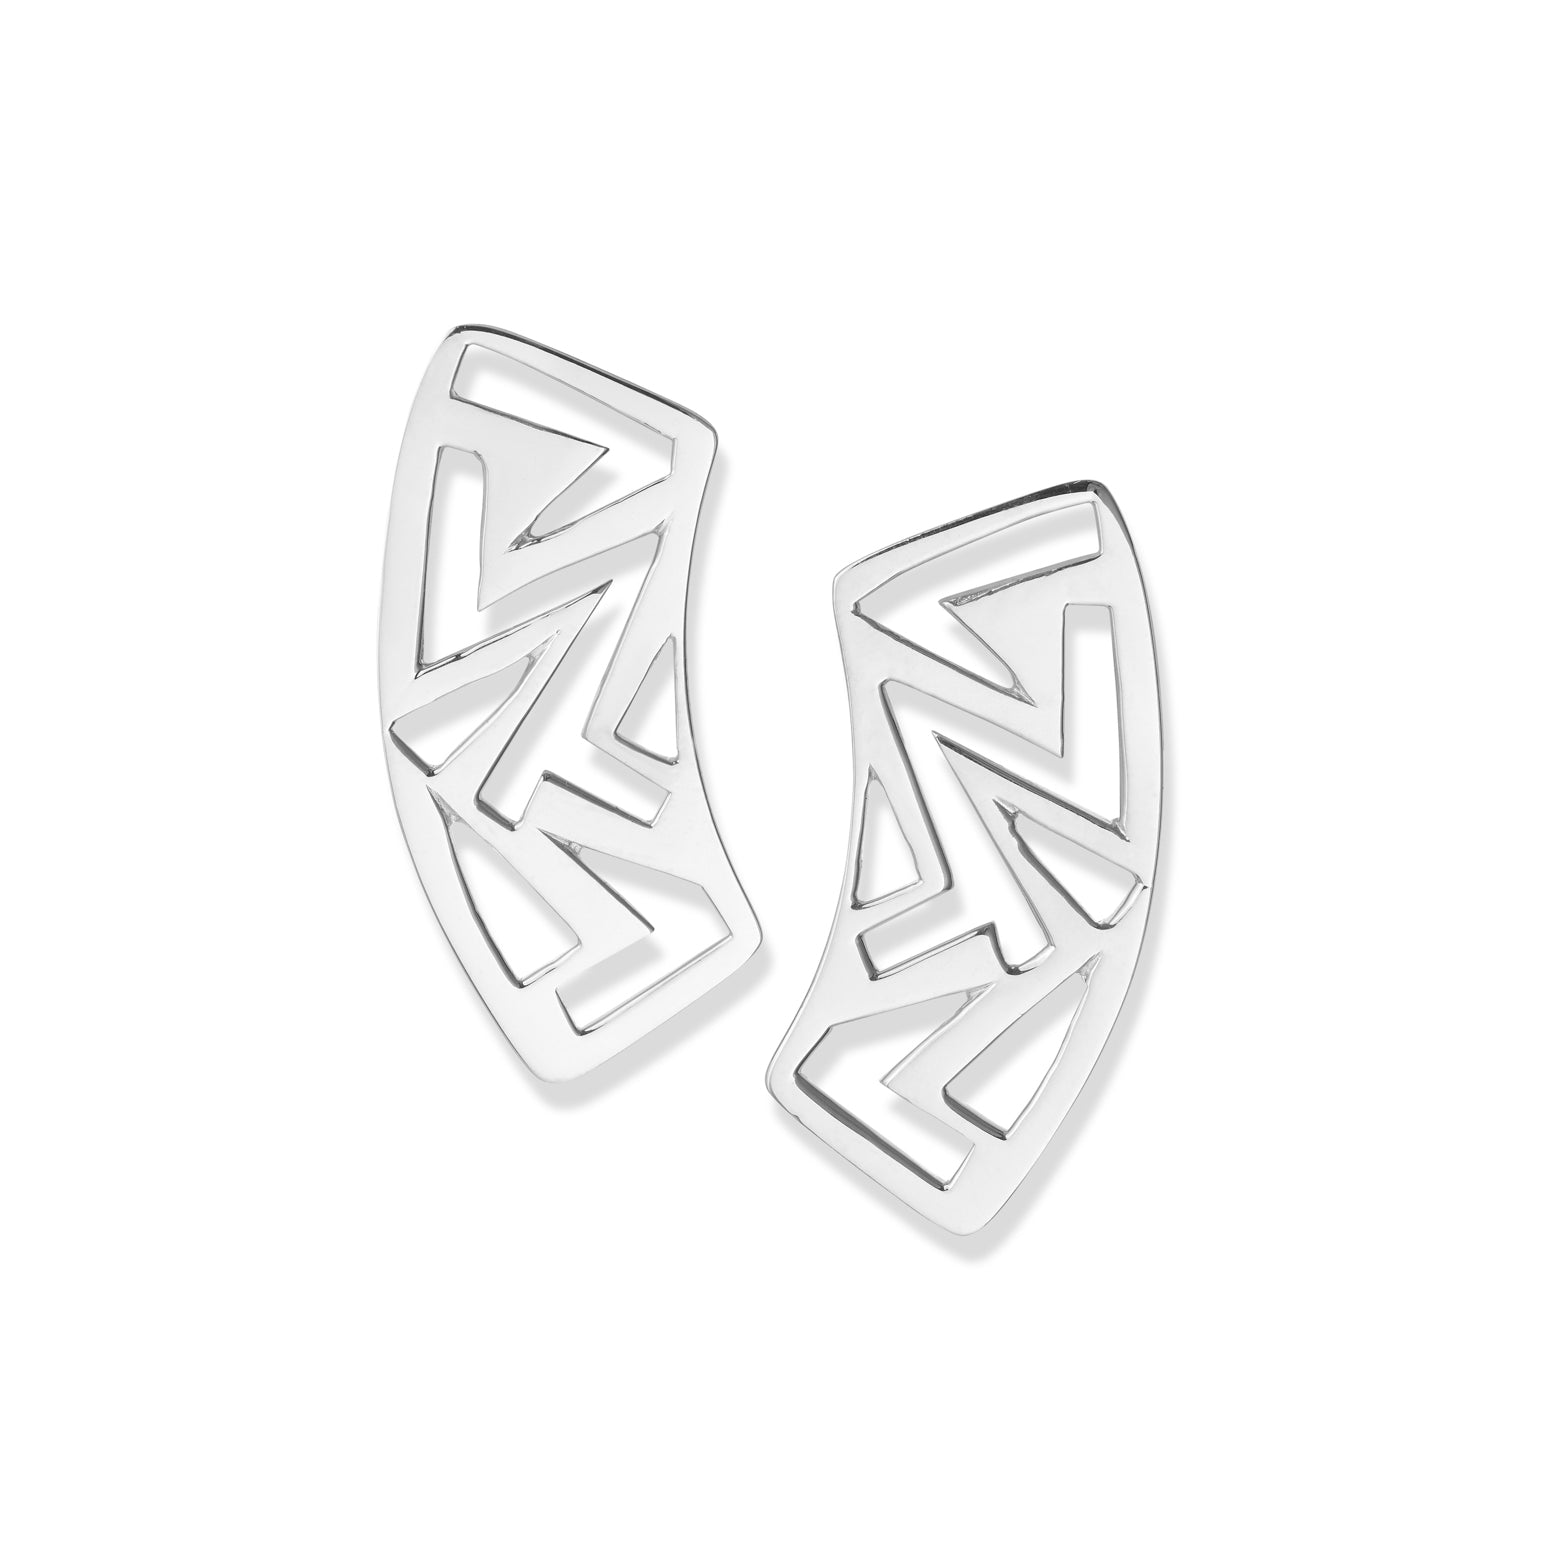 Kelly Woodcroft Jeweller handcrafted silver treetop canopy earrings feature geometric shapes and curved edges. 